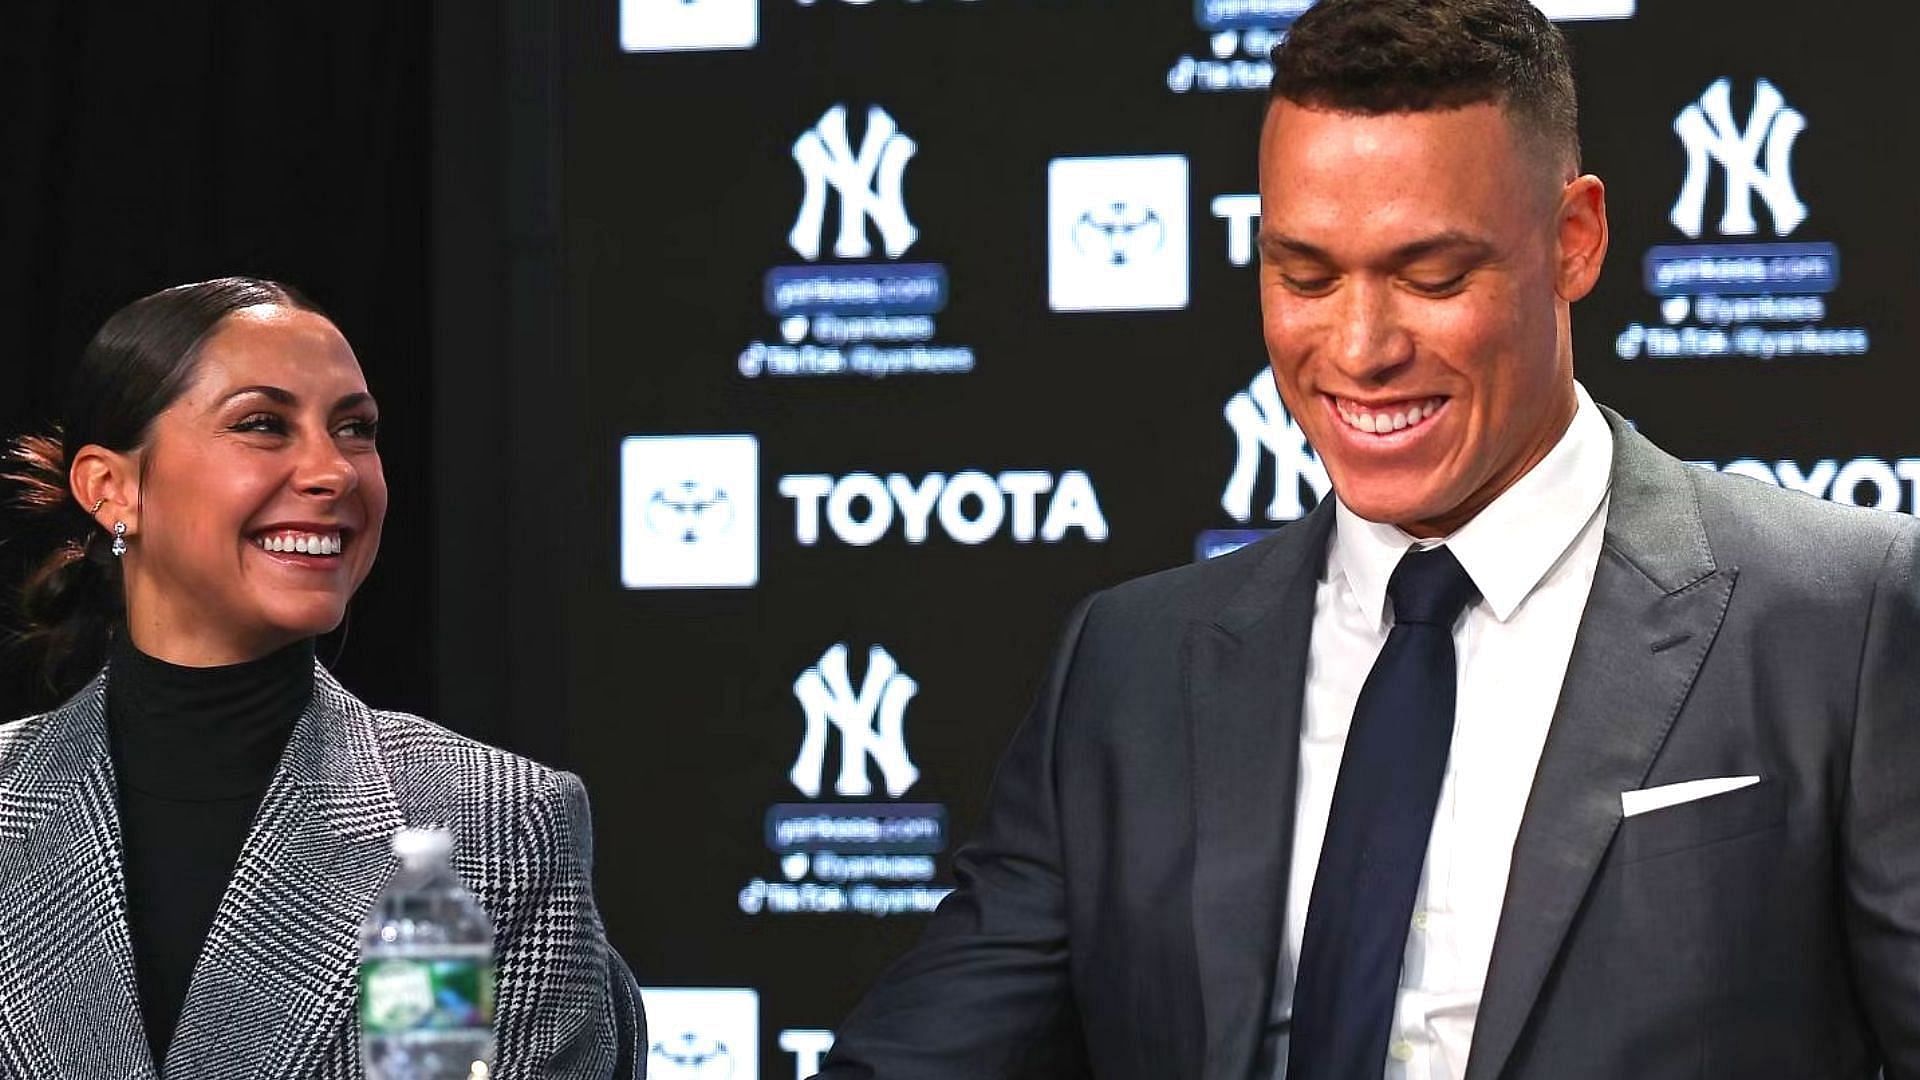 BRONX, NEW YORK - DECEMBER 21: Aaron Judge #99 of the New York Yankees and his wife Samantha Judge look on during a press conference at Yankee Stadium on December 21, 2022 in Bronx, New York. (Photo by Dustin Satloff/Getty Images)